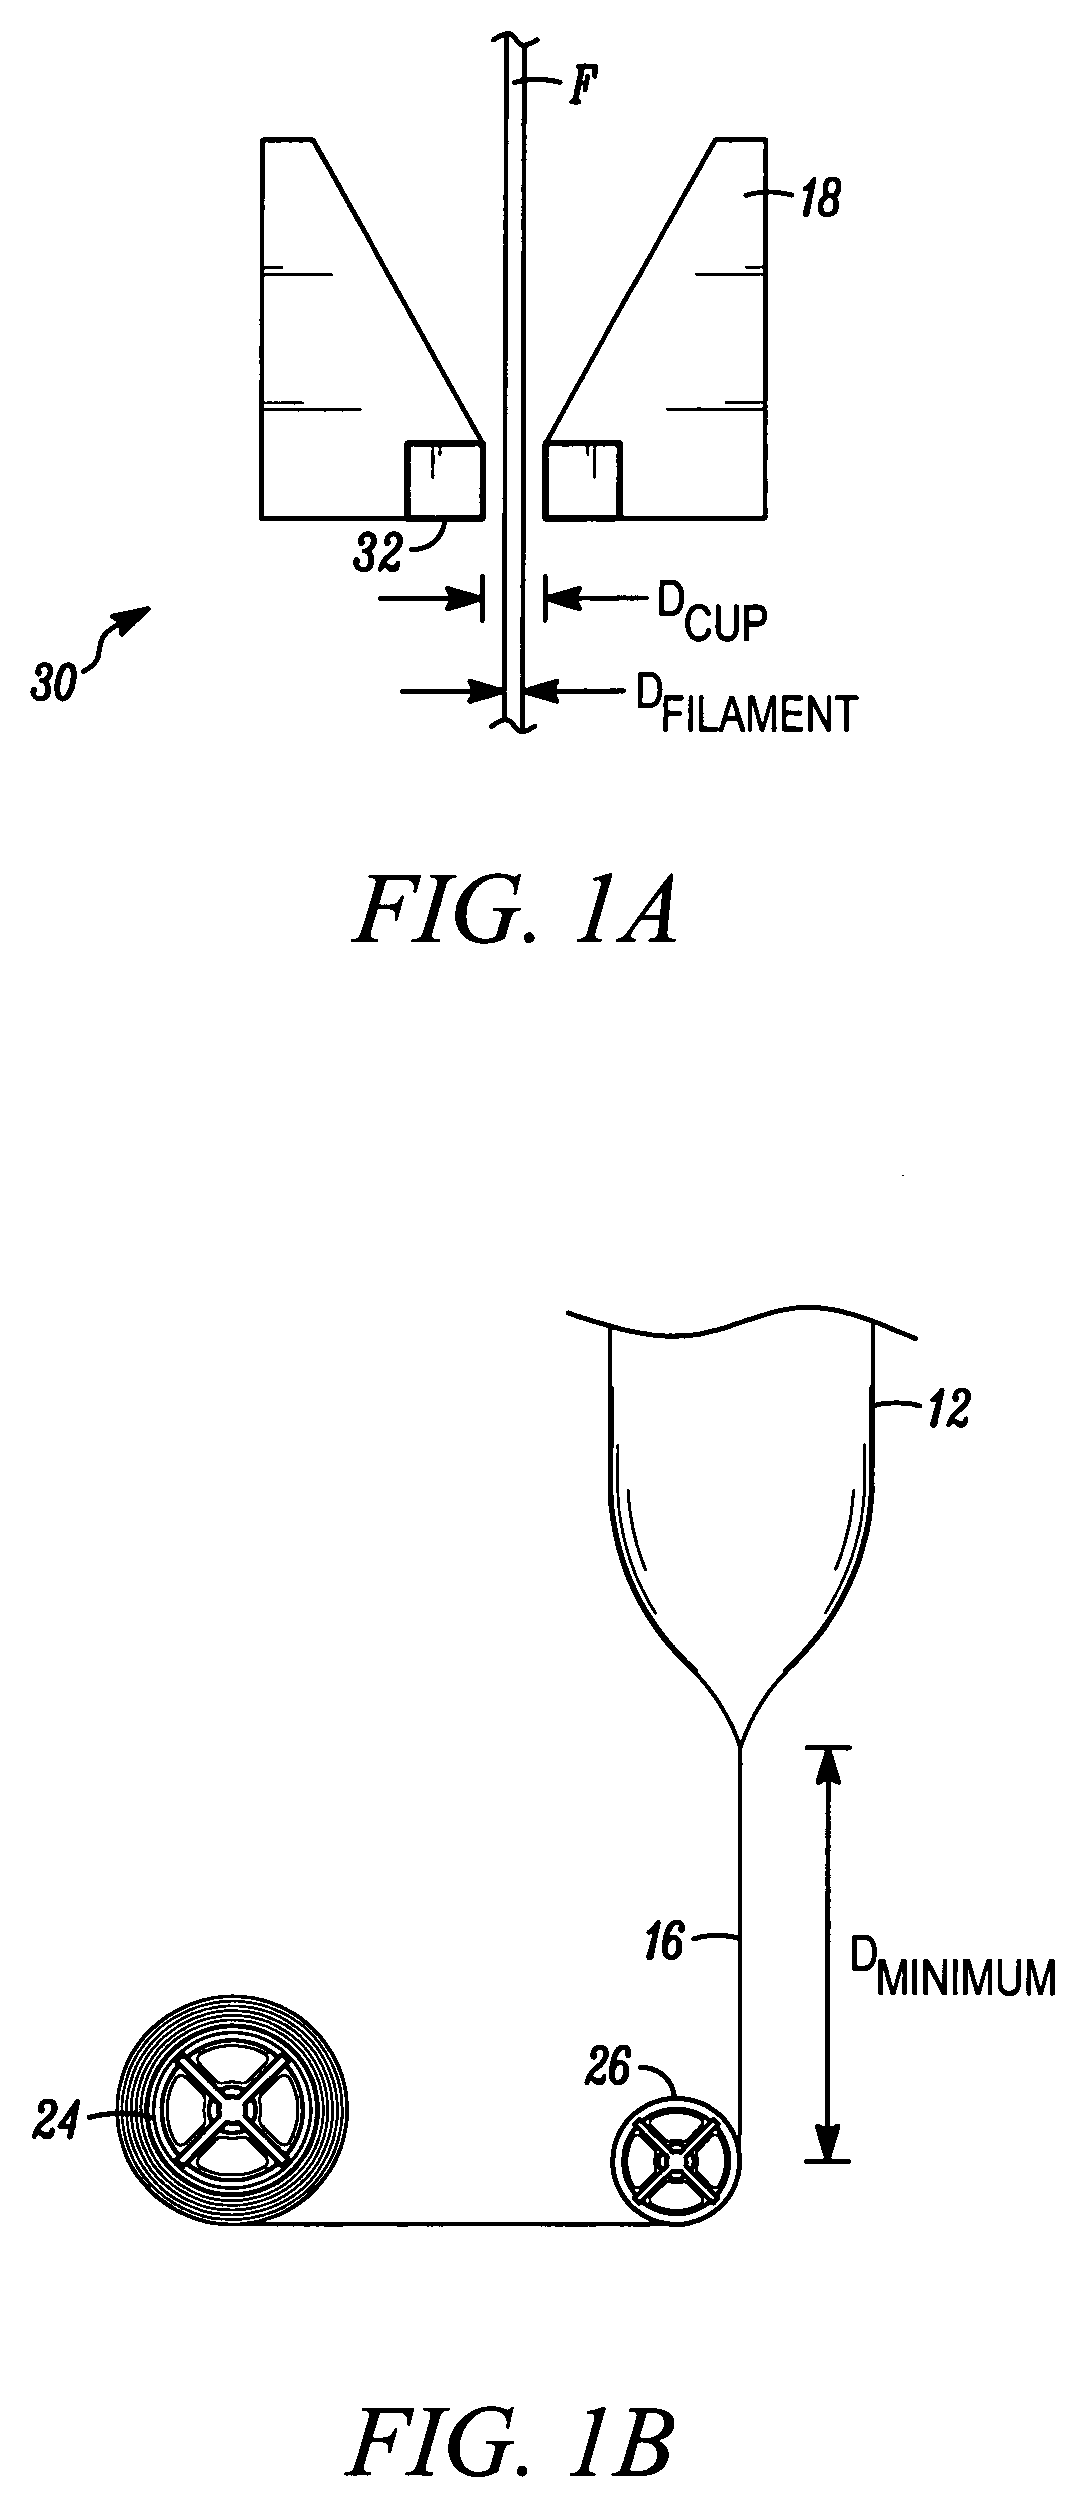 Filament with easily removed protective coating and methods for stripping the same